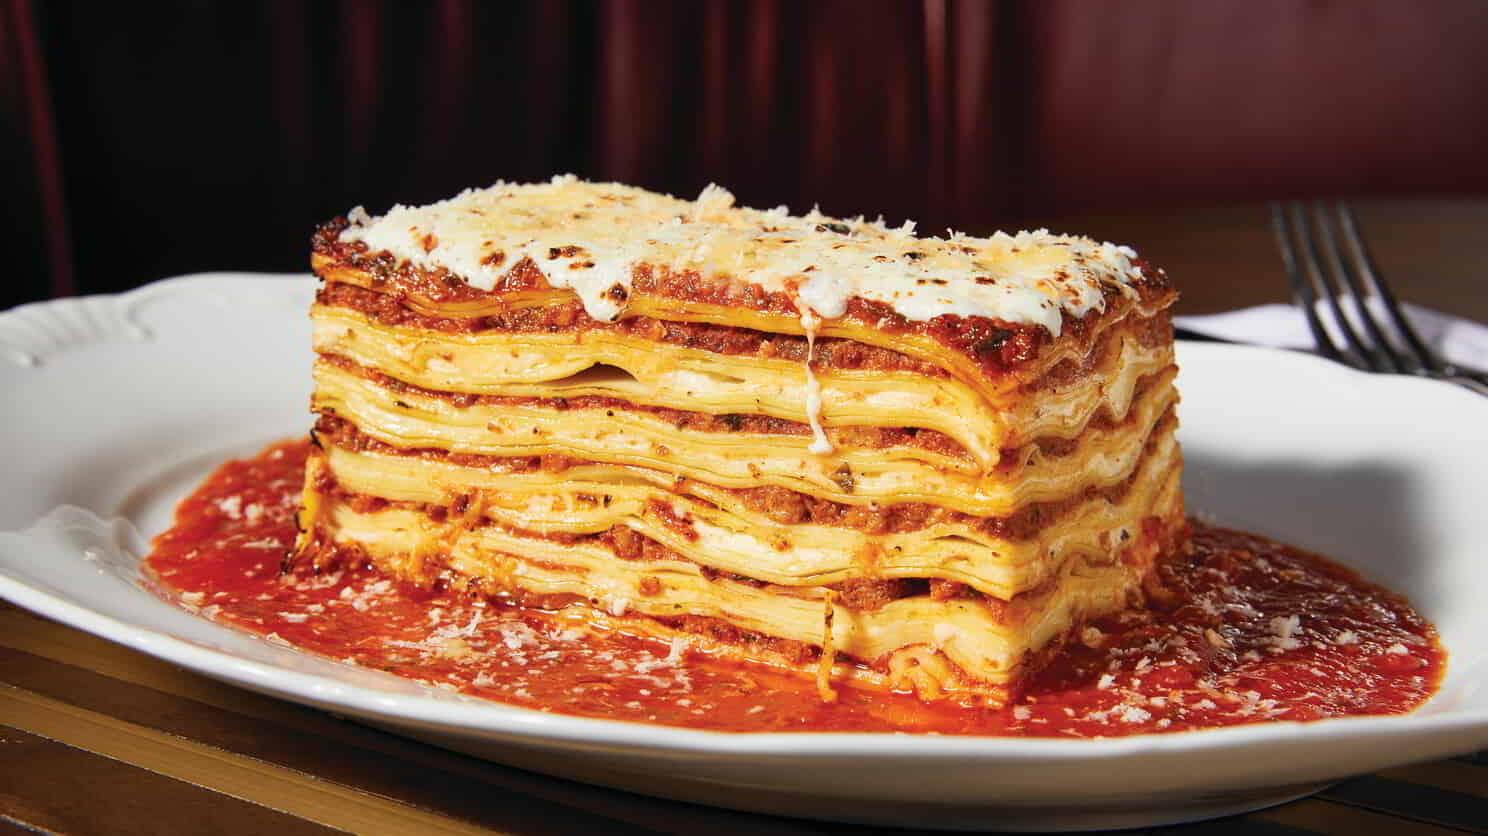 A tall lasagna topped with lots of cheese and sitting atop red sauce on a plate.